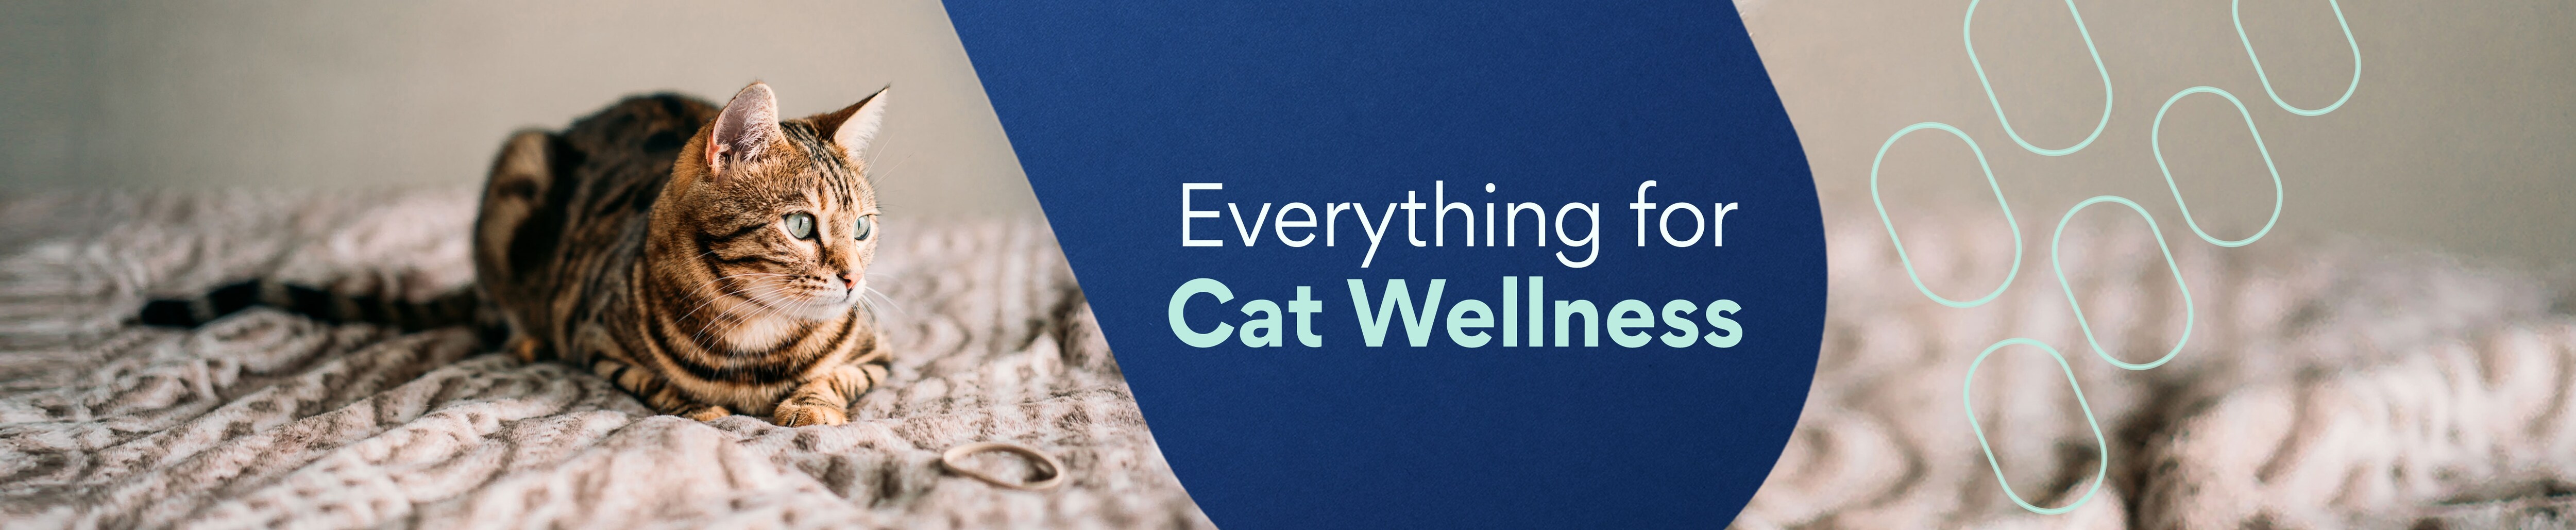 everything for cat wellness